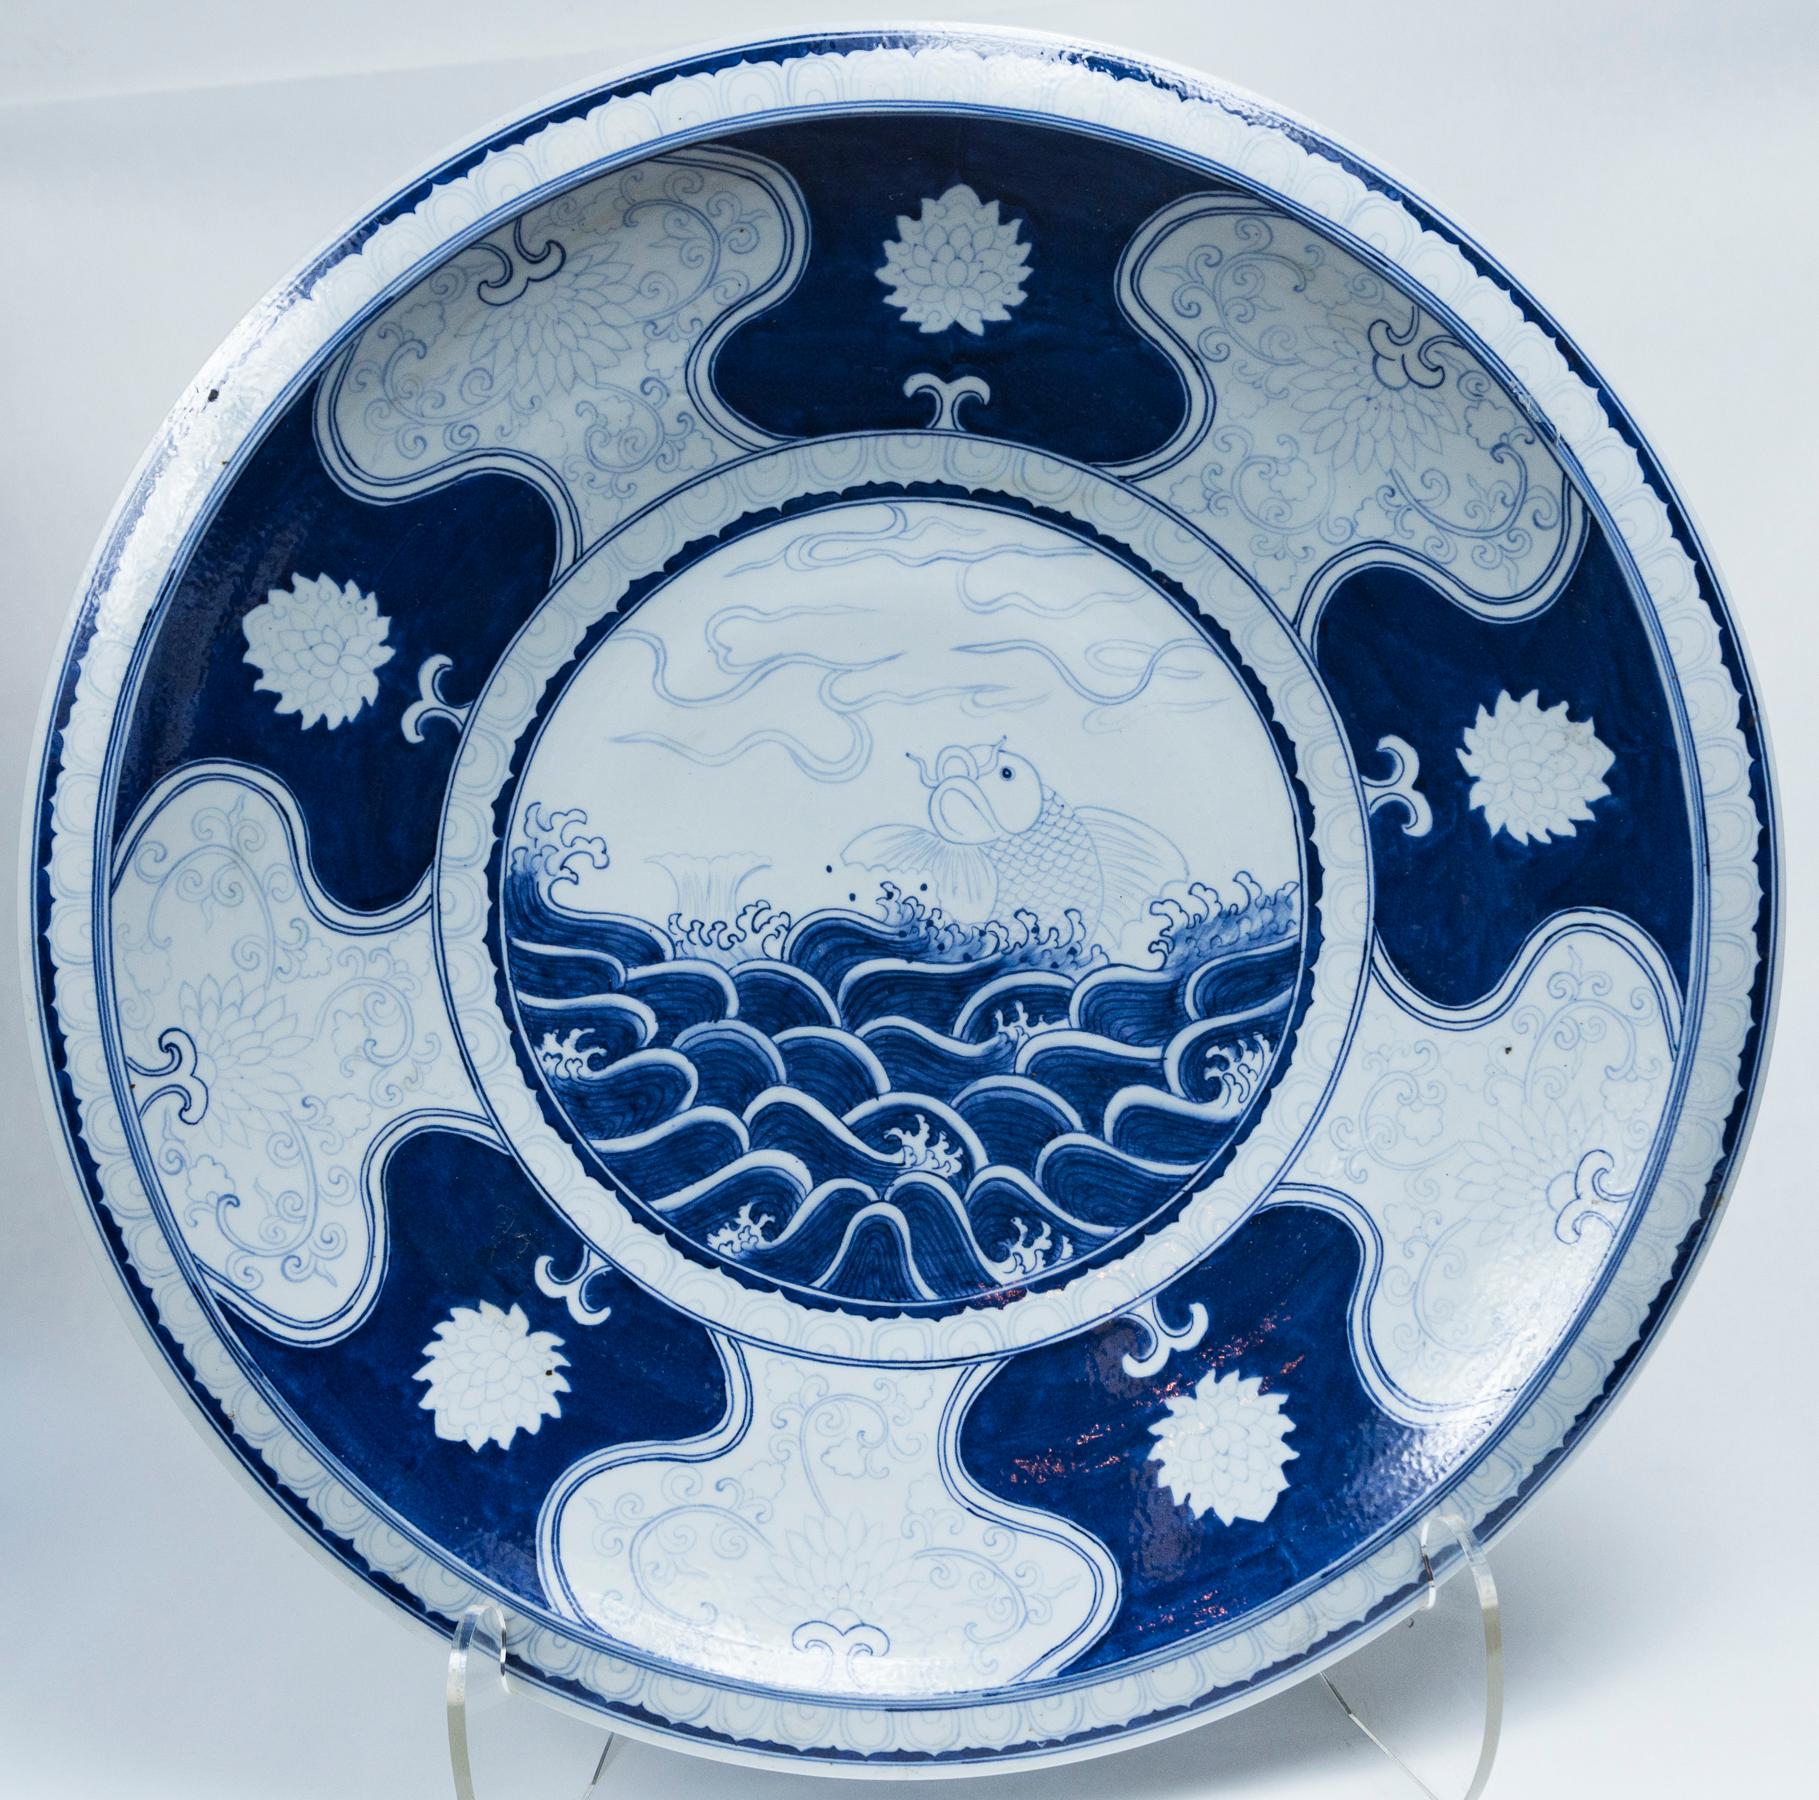 This charger or possibly a shallow bowl is centered with a leaping carp or koi amongst ocean waves. That is surrounded by 5 blue plaques with a chrysanthemum flower in white, the back rim with more intricate design in white, on a blue